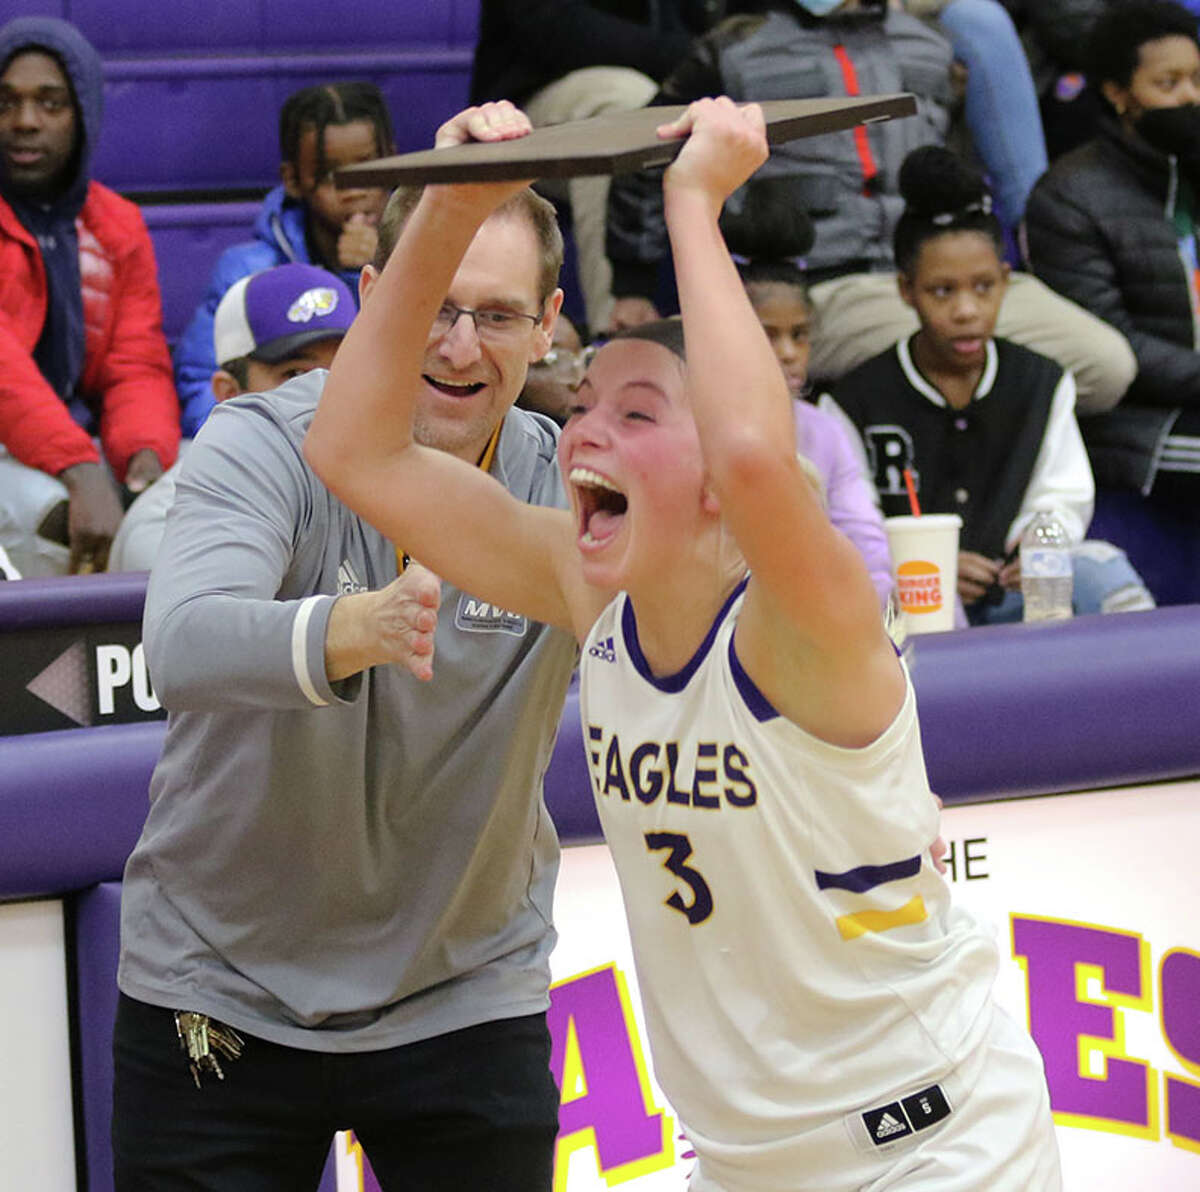 CM's Kelbie Zupan takes the championship plaque from CM AD Todd Hannaford and delivers it to teammates after the Eagles' won a regional title in Bethalto in February.